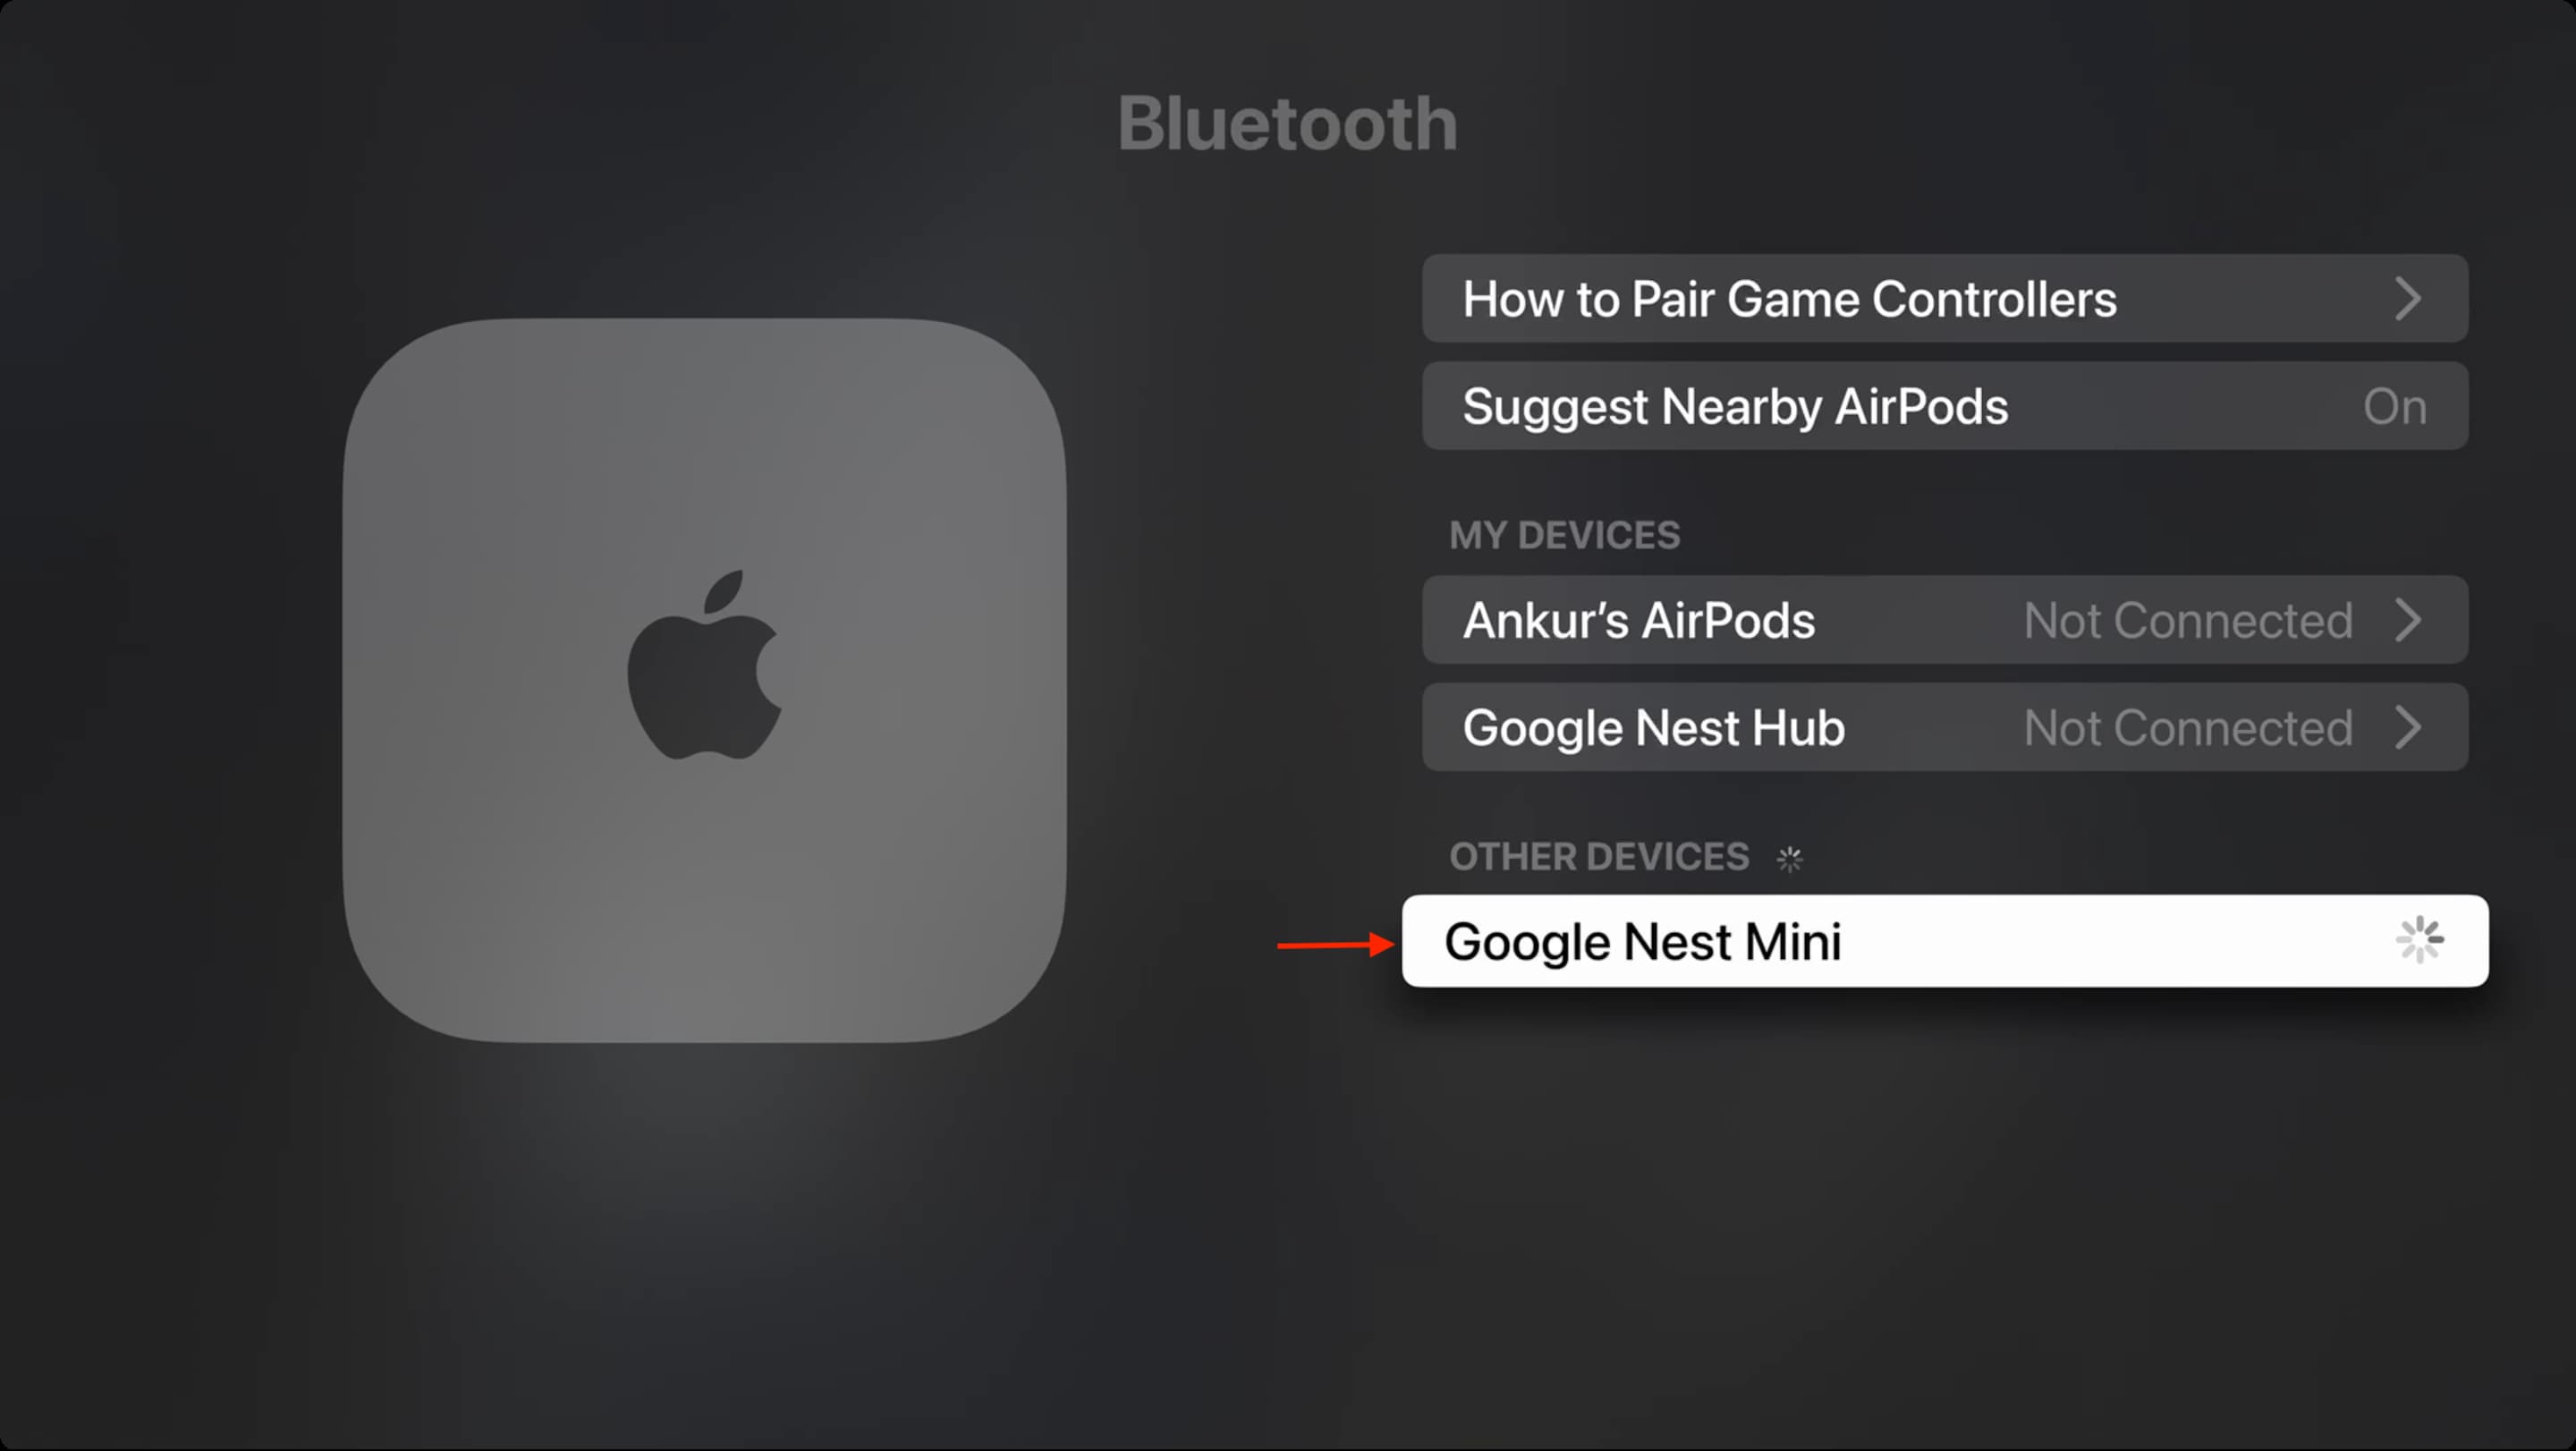 Bluetooth speaker appearing under Other Devices on Apple TV